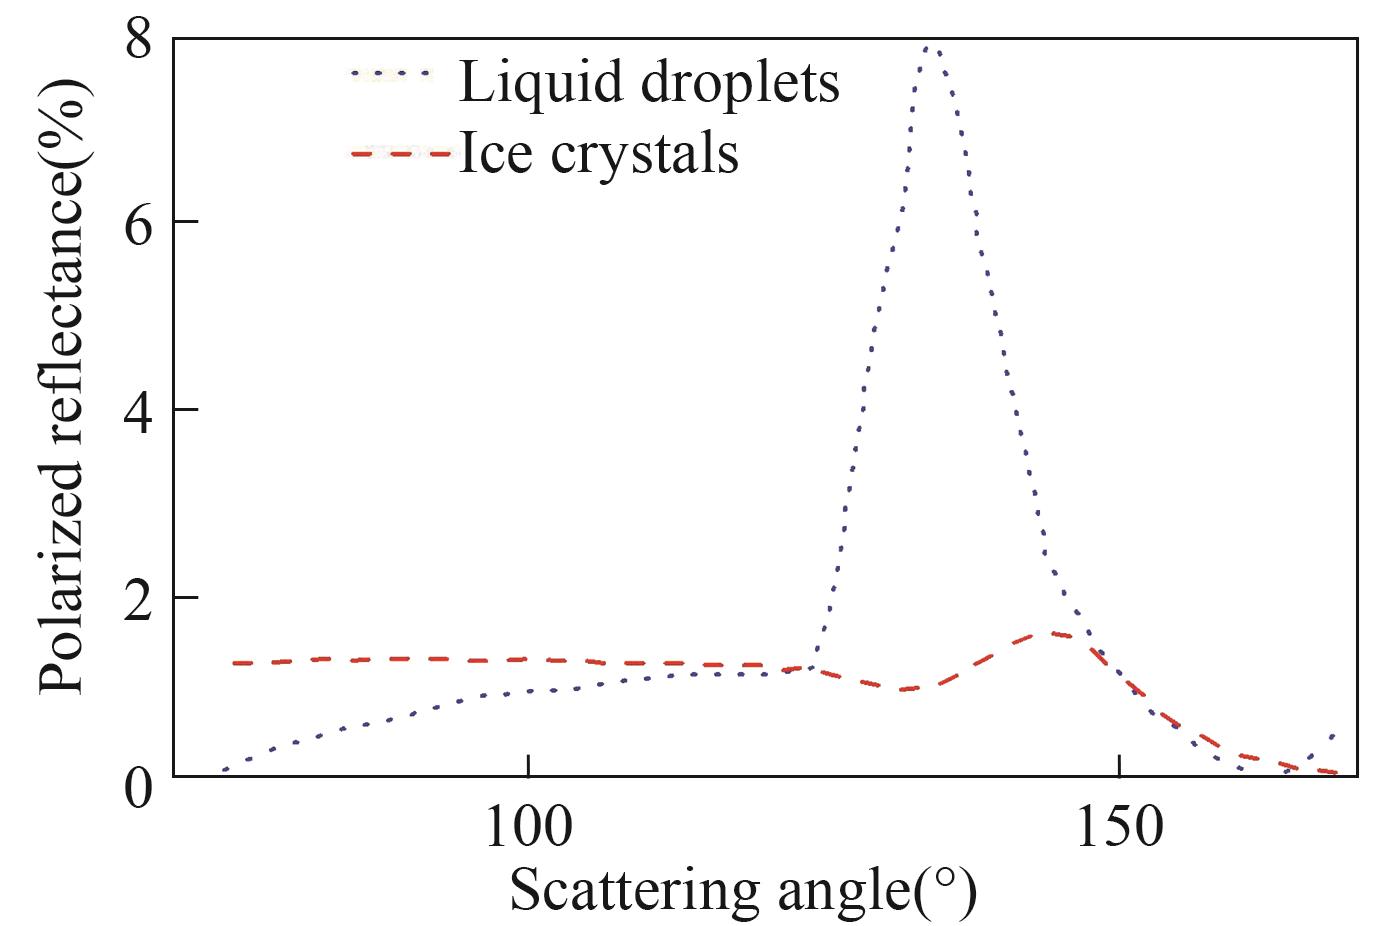 The relationship of scattering angles with 865nm polarized reflectance for liquid droplets and ice crystals respectly in cloud